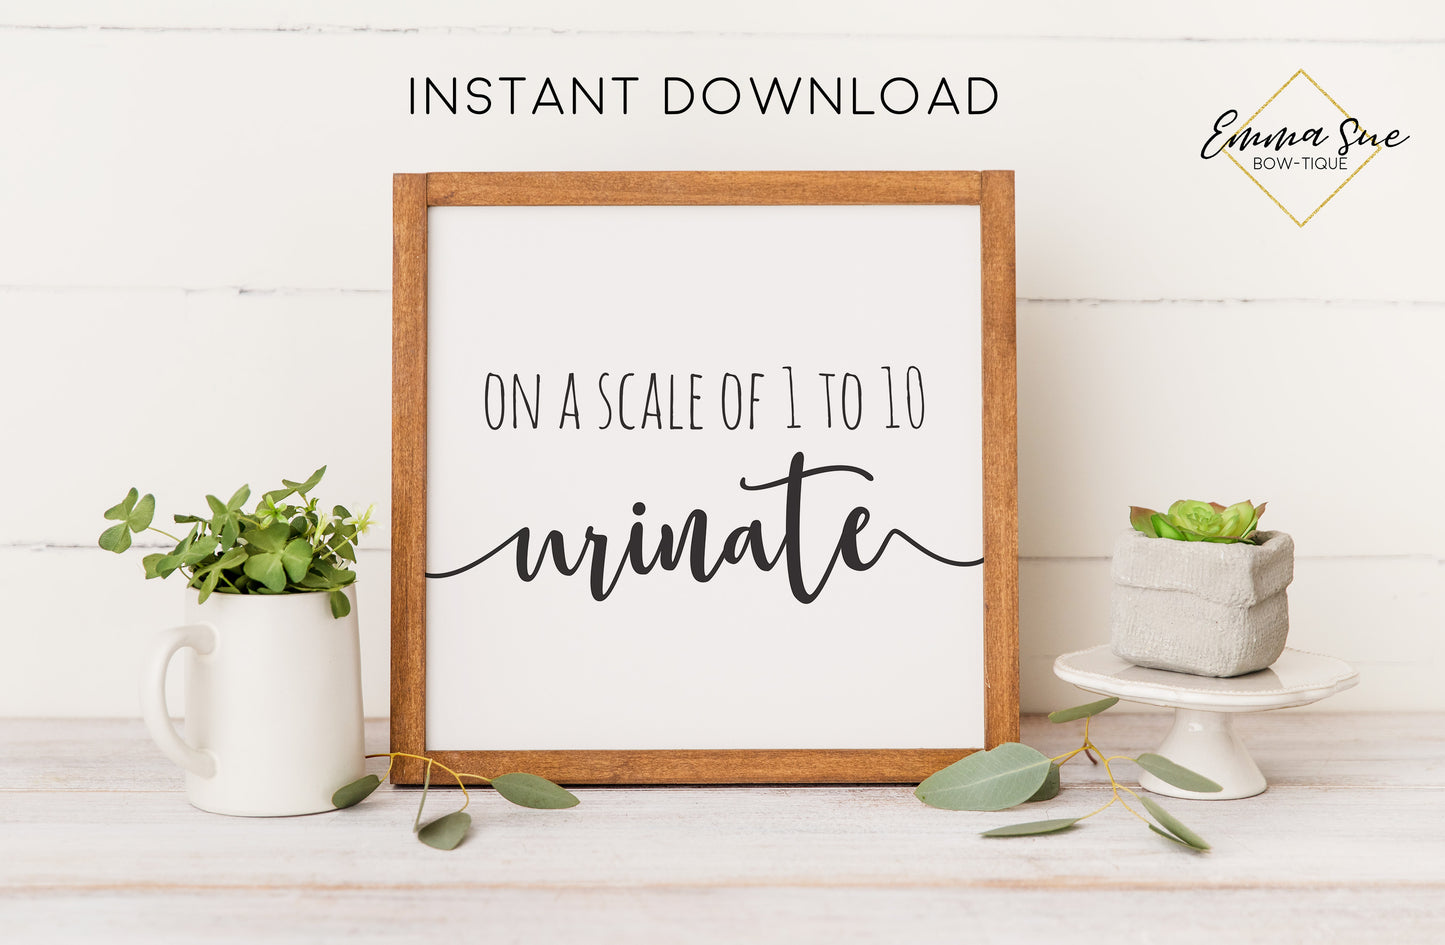 On a Scale of 1 to 10 Urinate - Bathroom Farmhouse Bathroom Art Digital Printable Instant Download